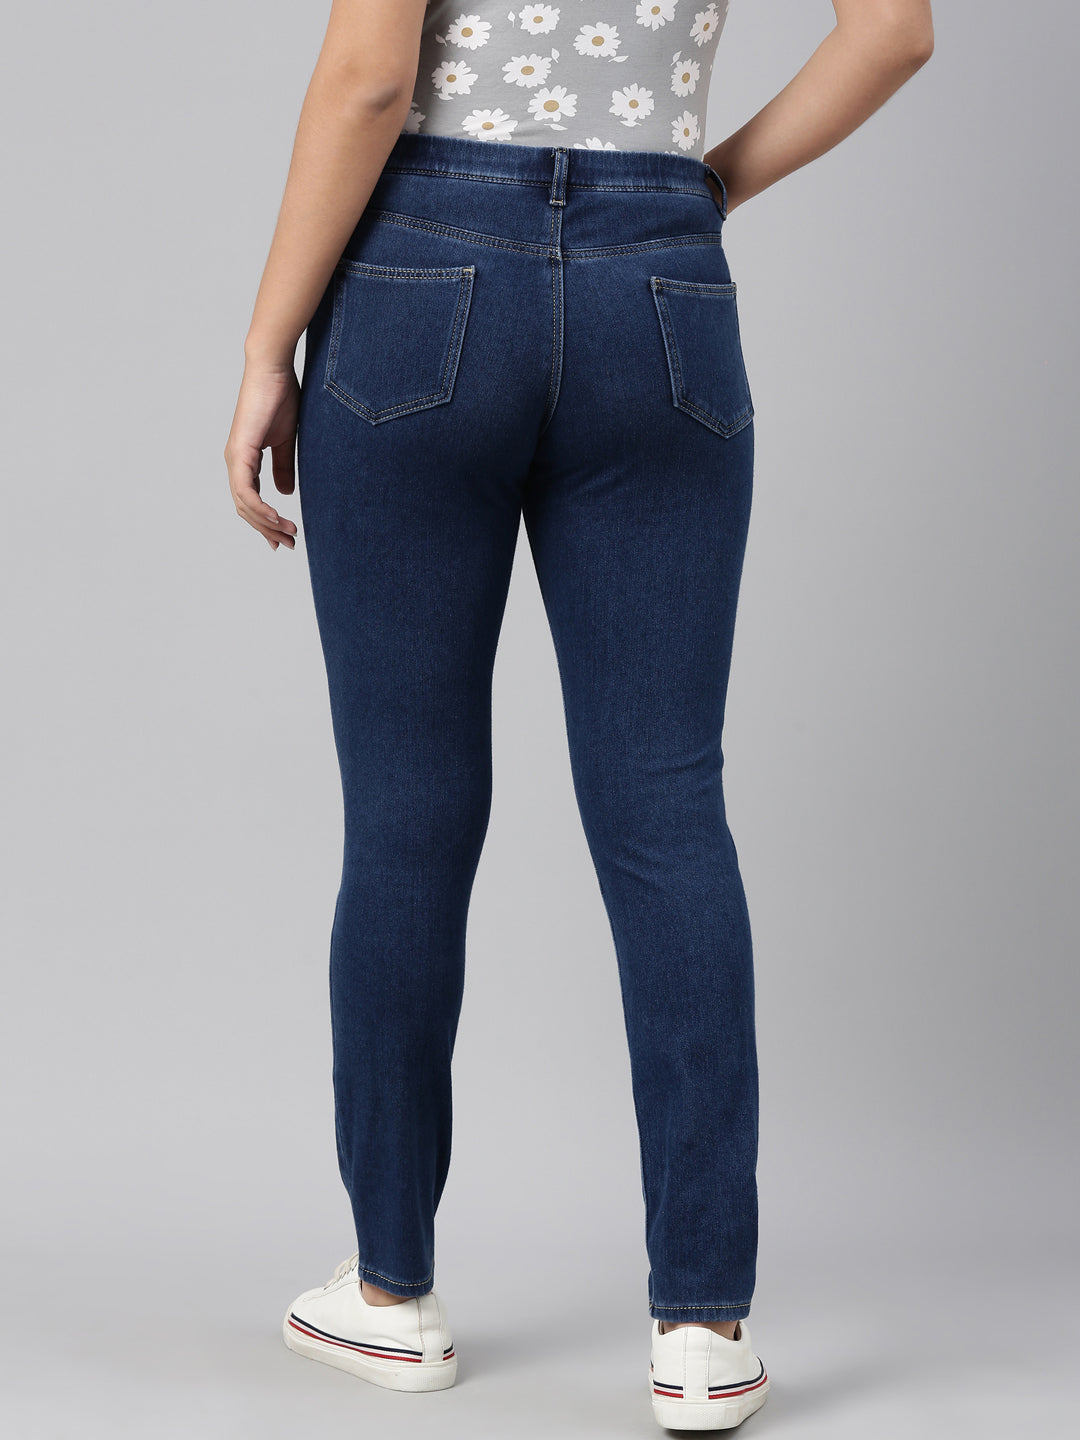 Jeans Women Jegging at Rs 700/piece | Women Jeans in Noida | ID: 13244487973